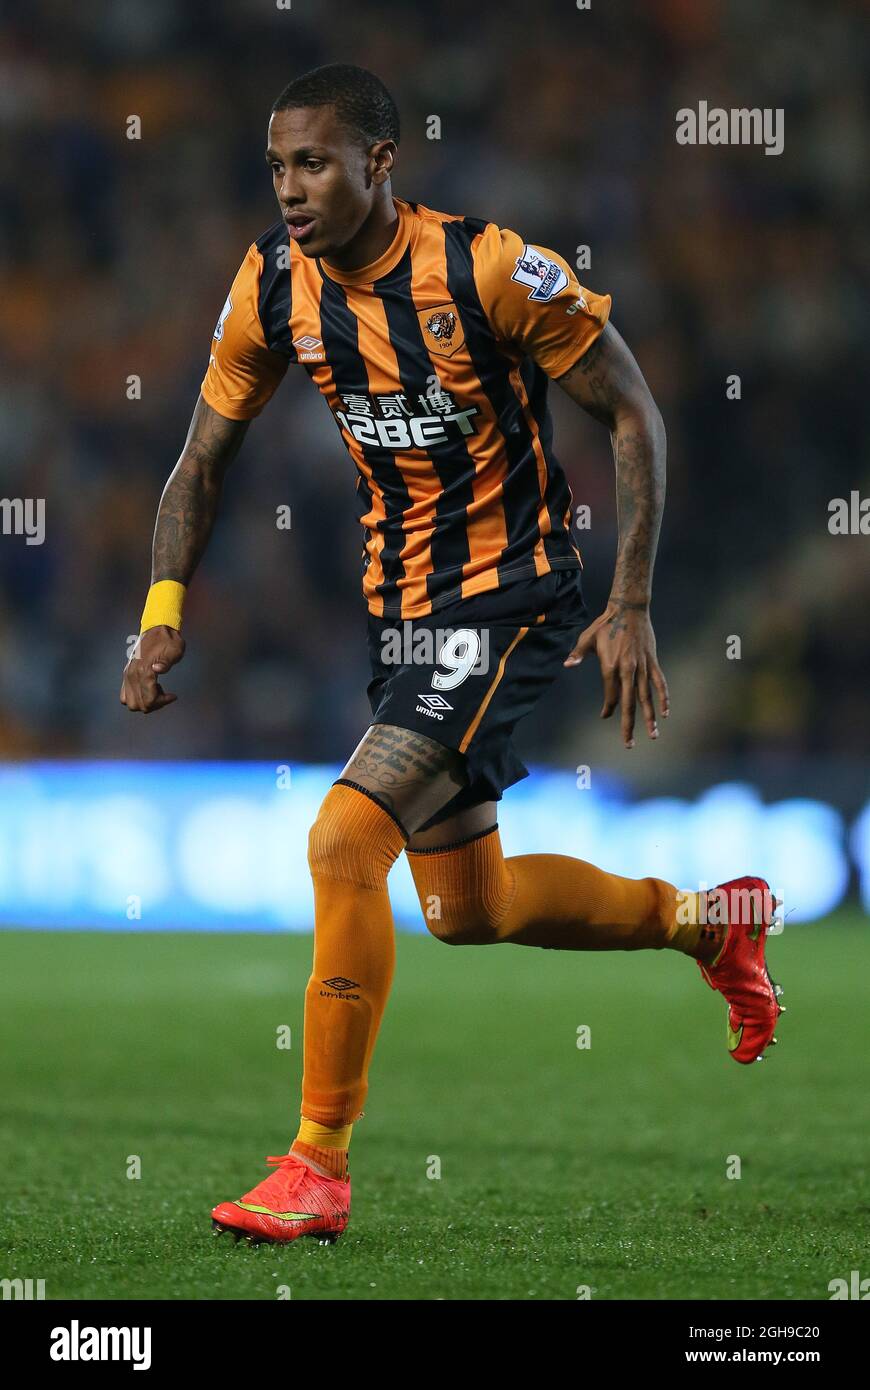 Abel Hernandez of Hull City in action during the Barclays Premier League match at the KC Stadium, Hull on 15th September 2014. Stock Photo